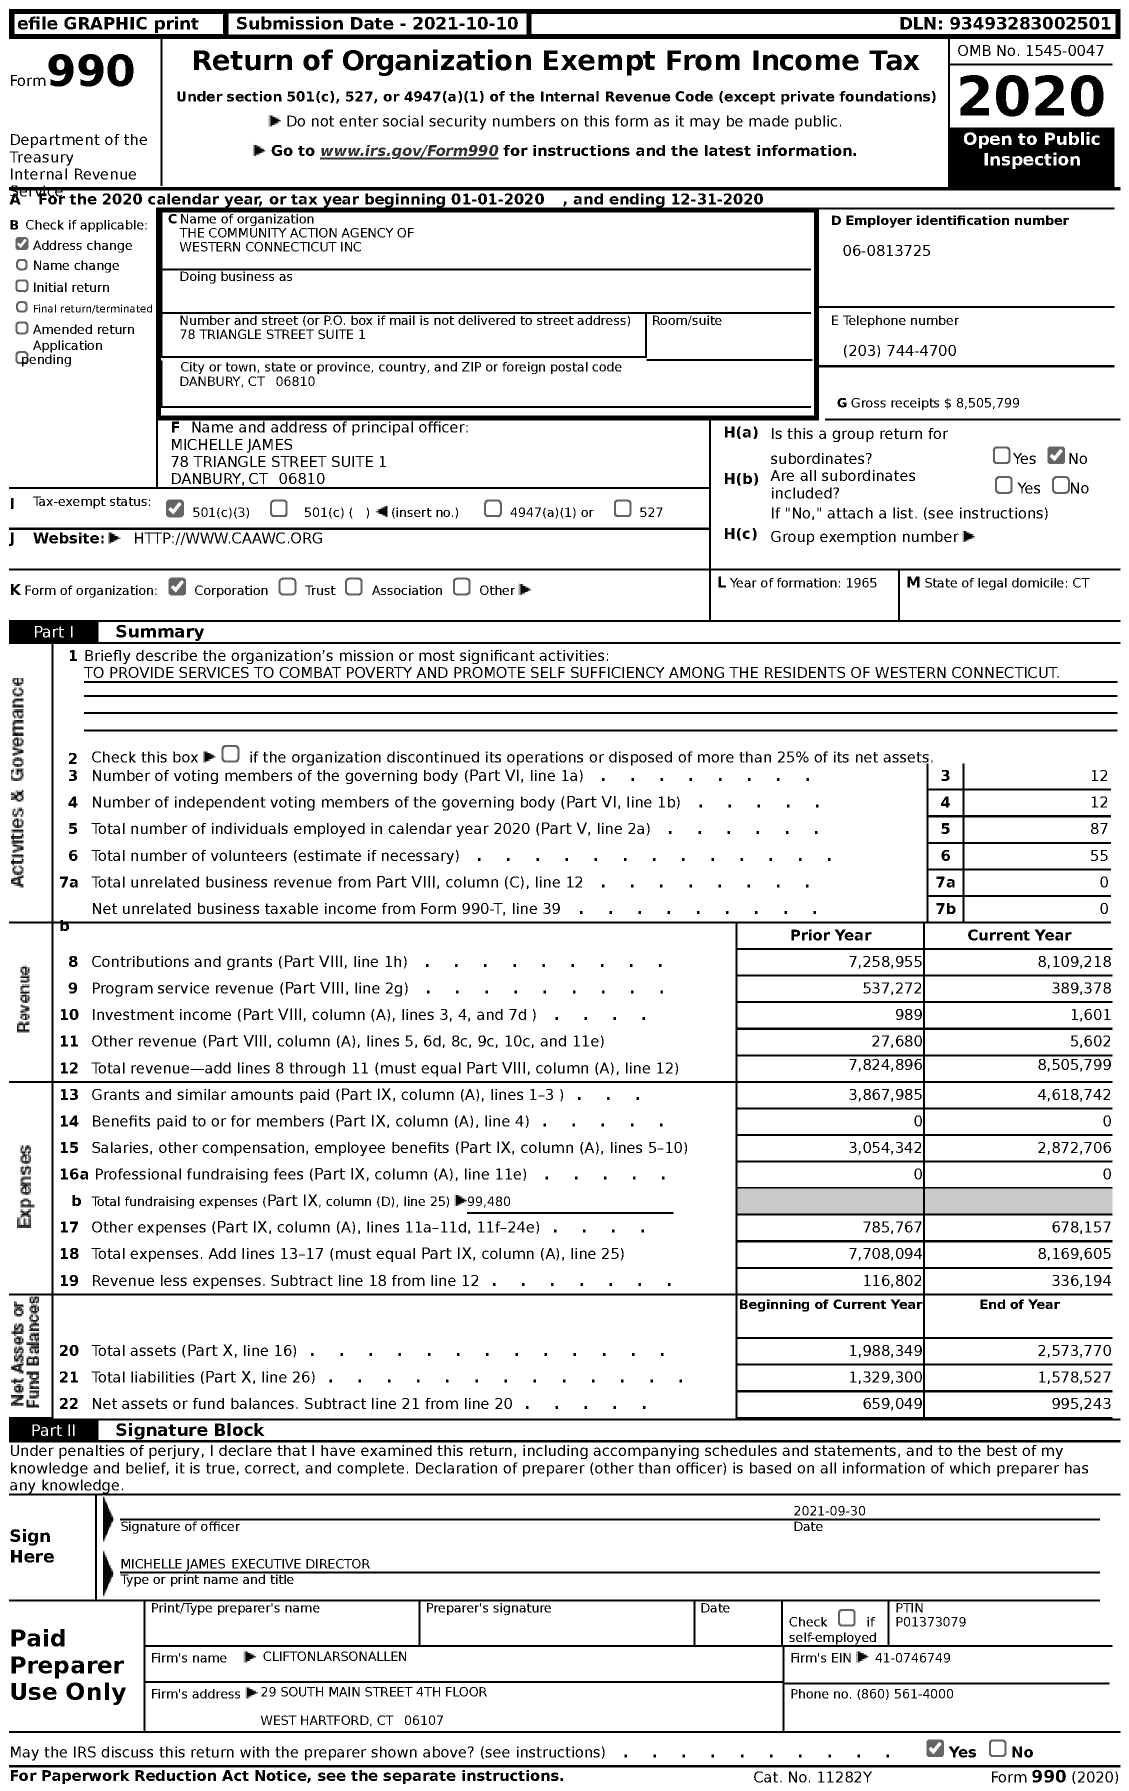 Image of first page of 2020 Form 990 for Community Action Agency of Western Connecticut (CAAWC)